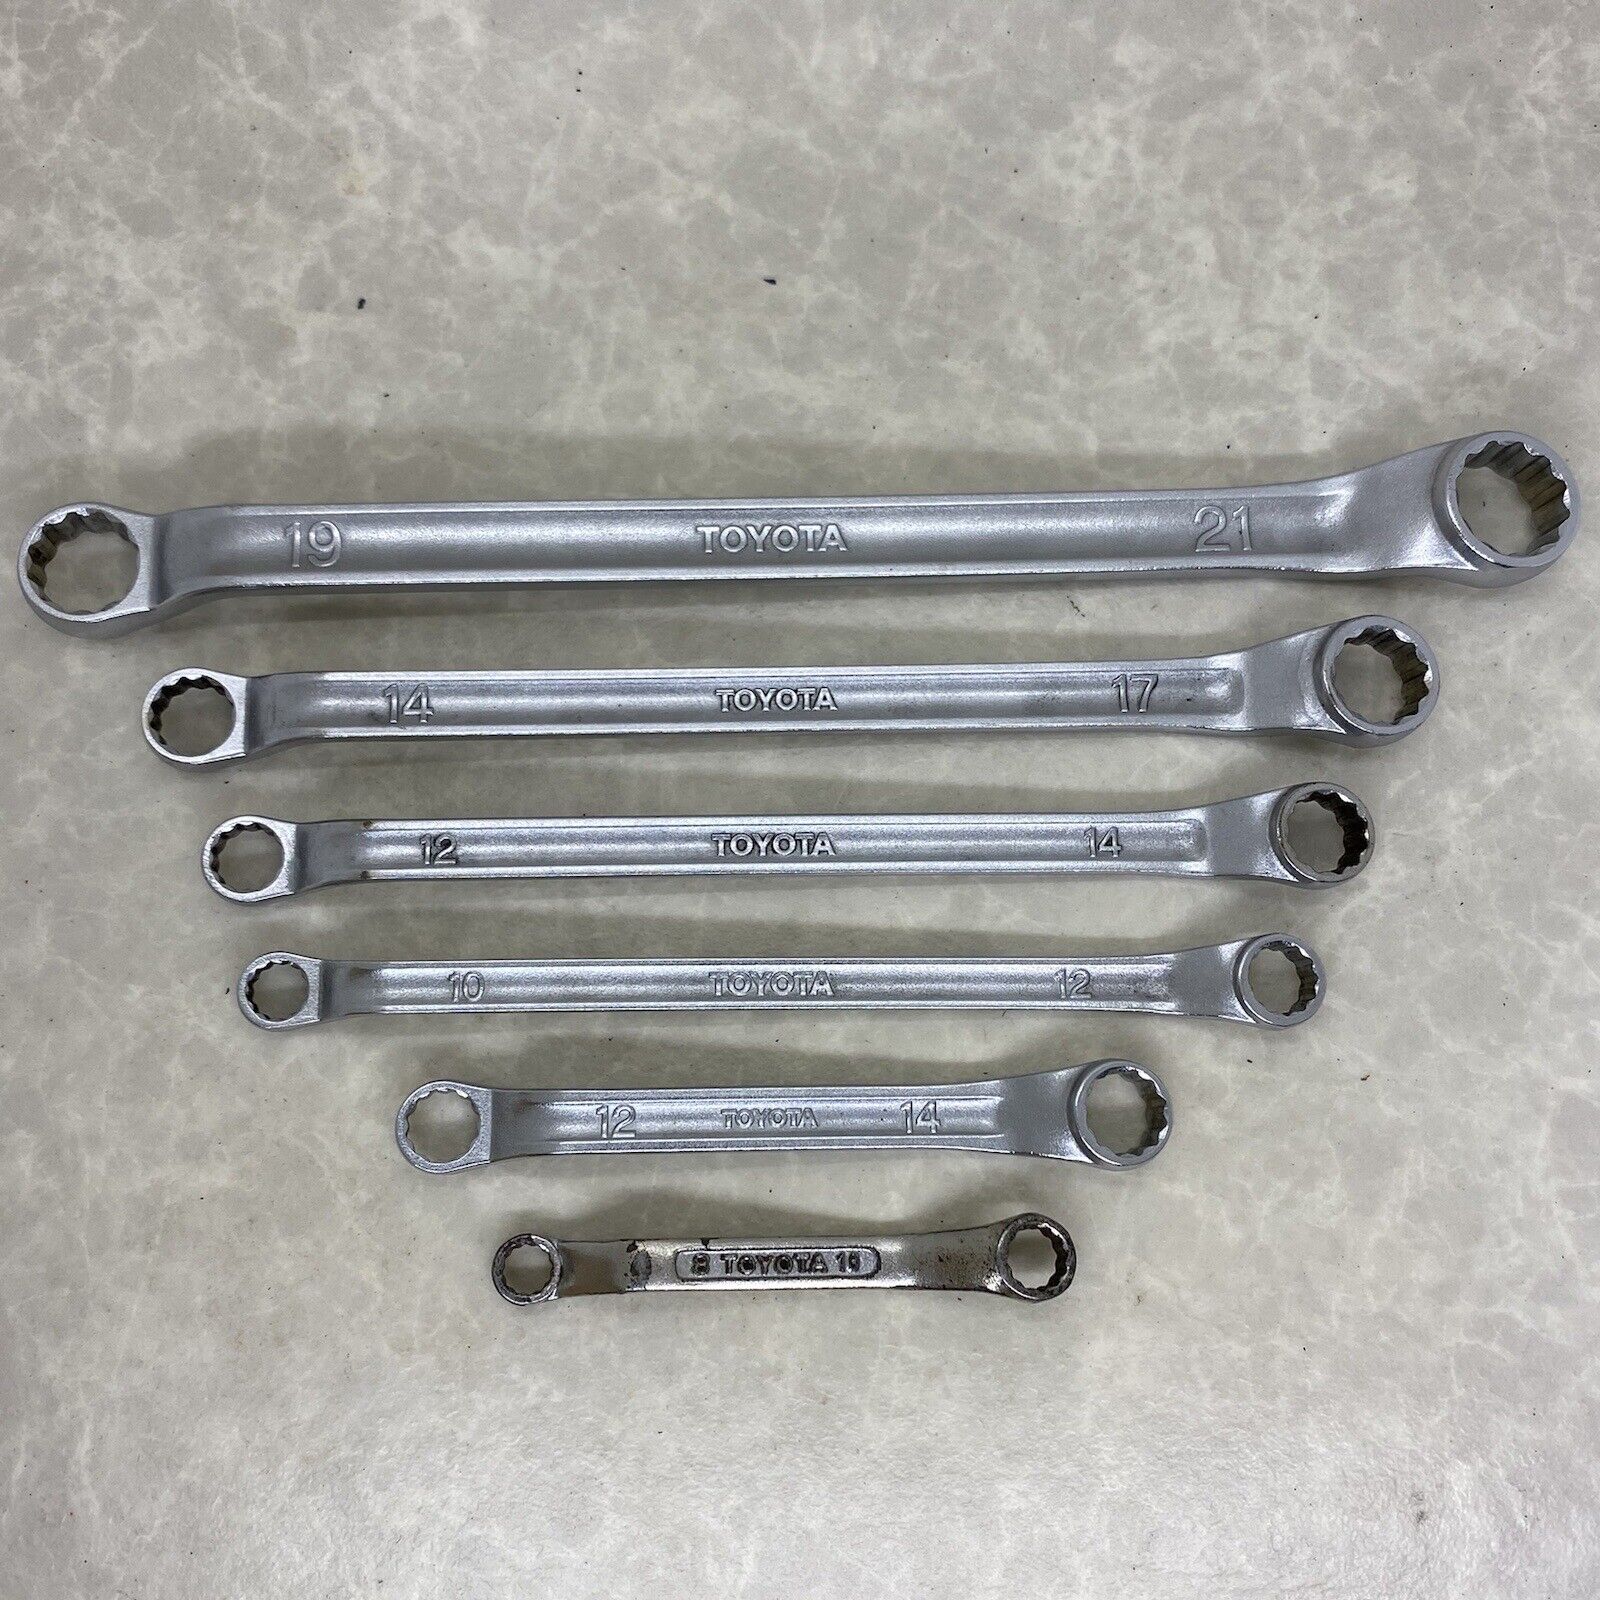 TOYOTA Offset Double Wrench Set of 6 TEQ Jdm Hand Tool